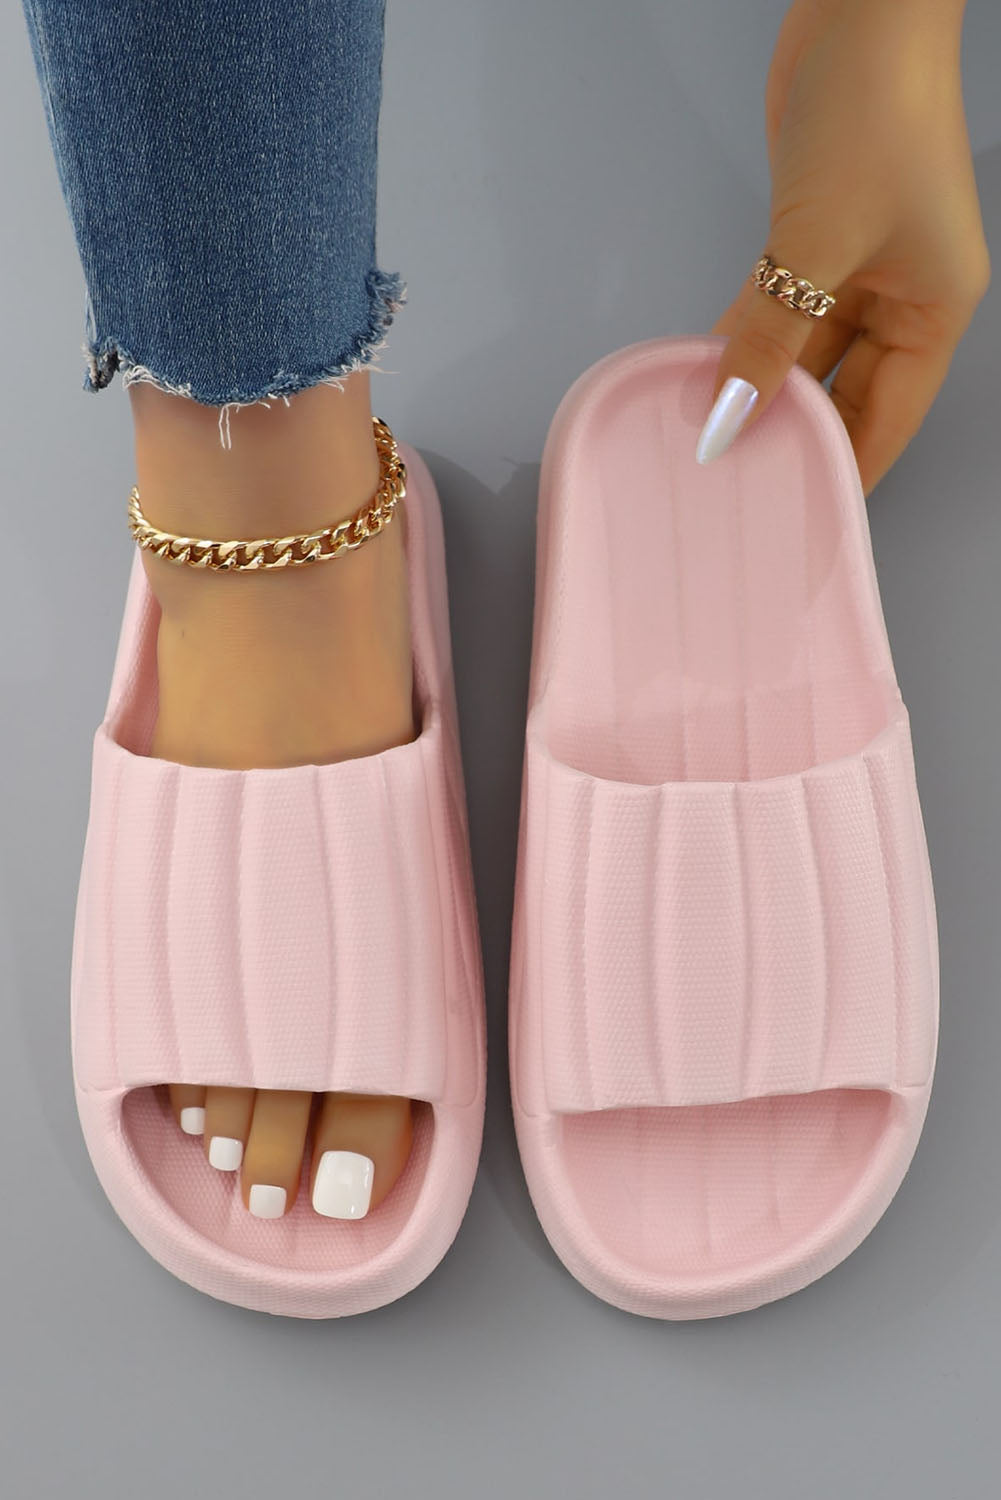 BH022533-10-37, BH022533-10-39, BH022533-10-41, BH022533-10-38, BH022533-10-40, Pink Slides for Women Open Toe Ribbed Slip-On Shower Slippers Indoor & Outdoor Sandals